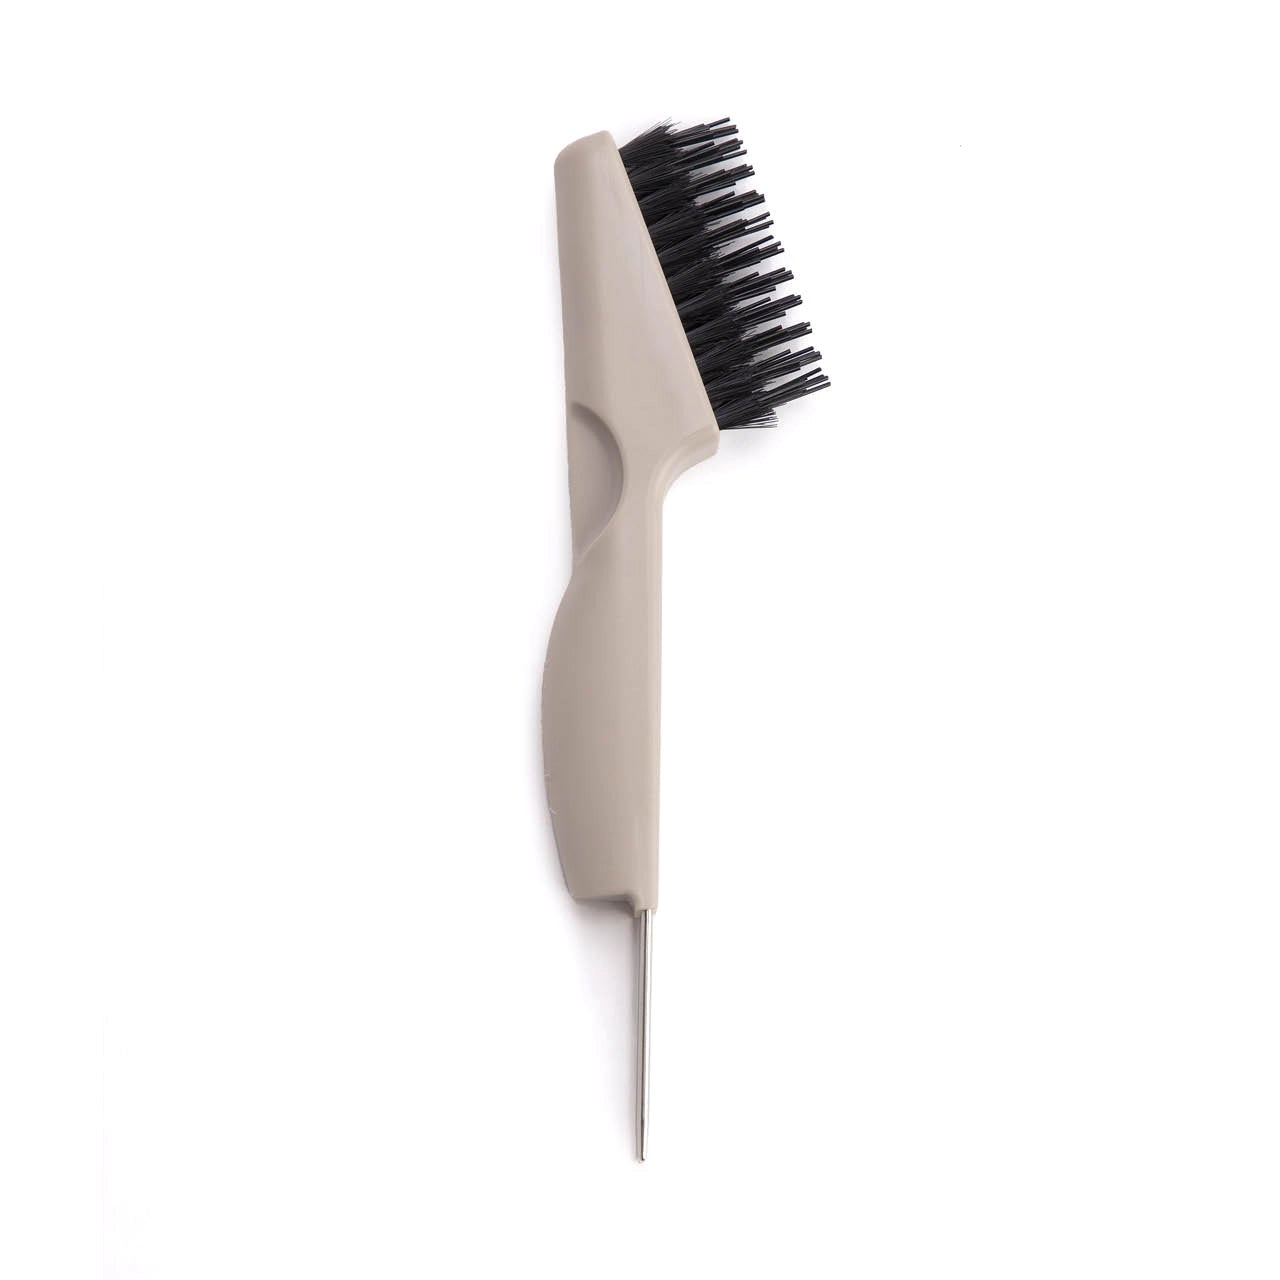 Hair Brush Cleaner Apex Ethical Boutique